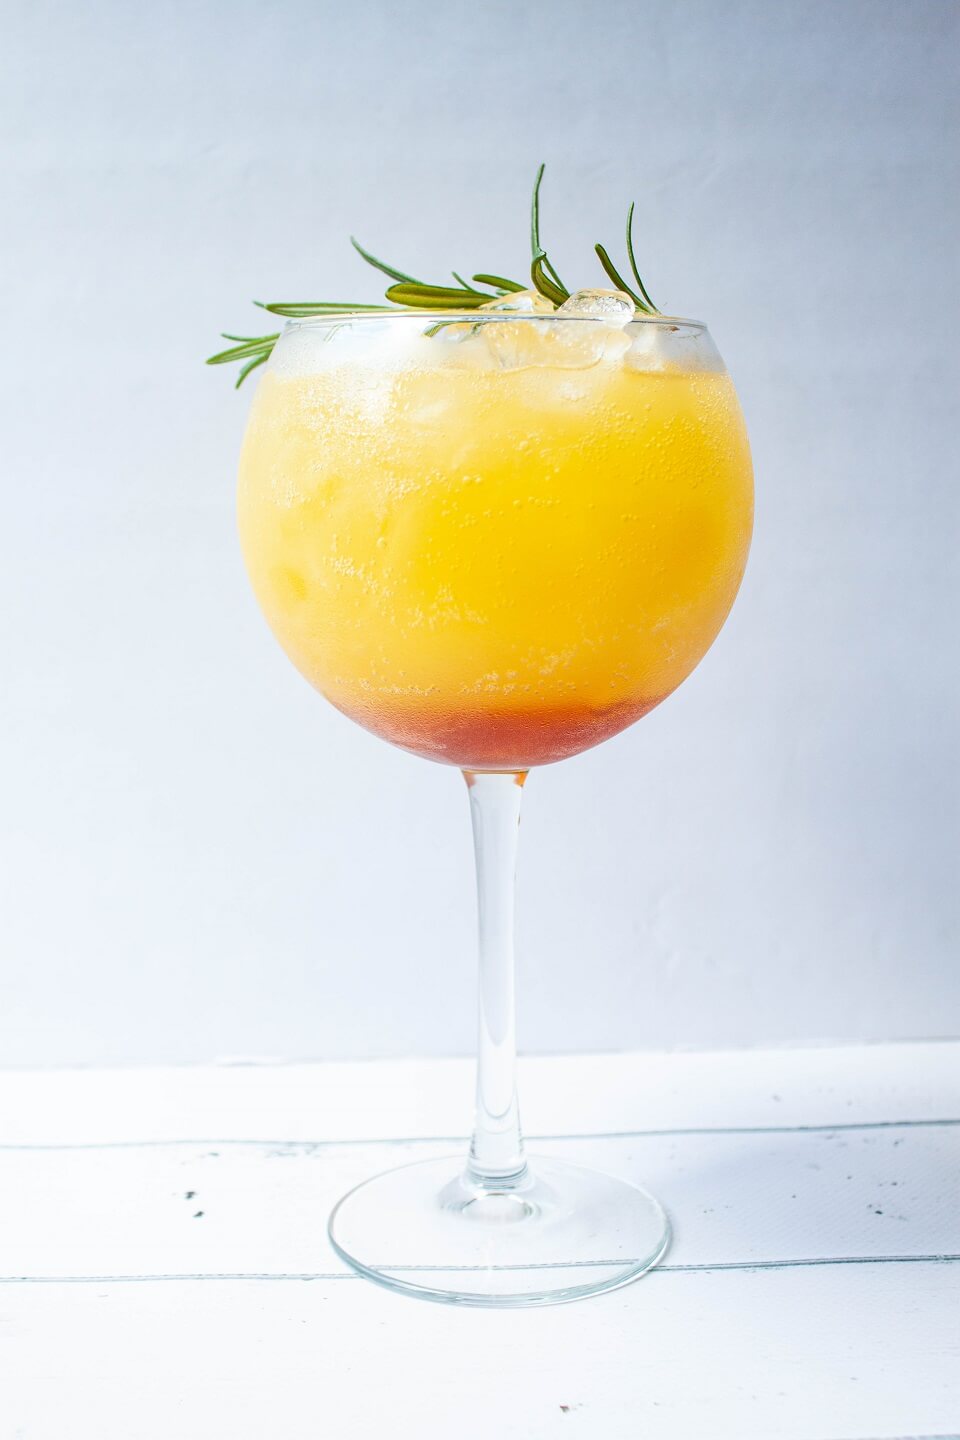 A single large wineglass containing an icy orange cocktail garnished with green rosemary.